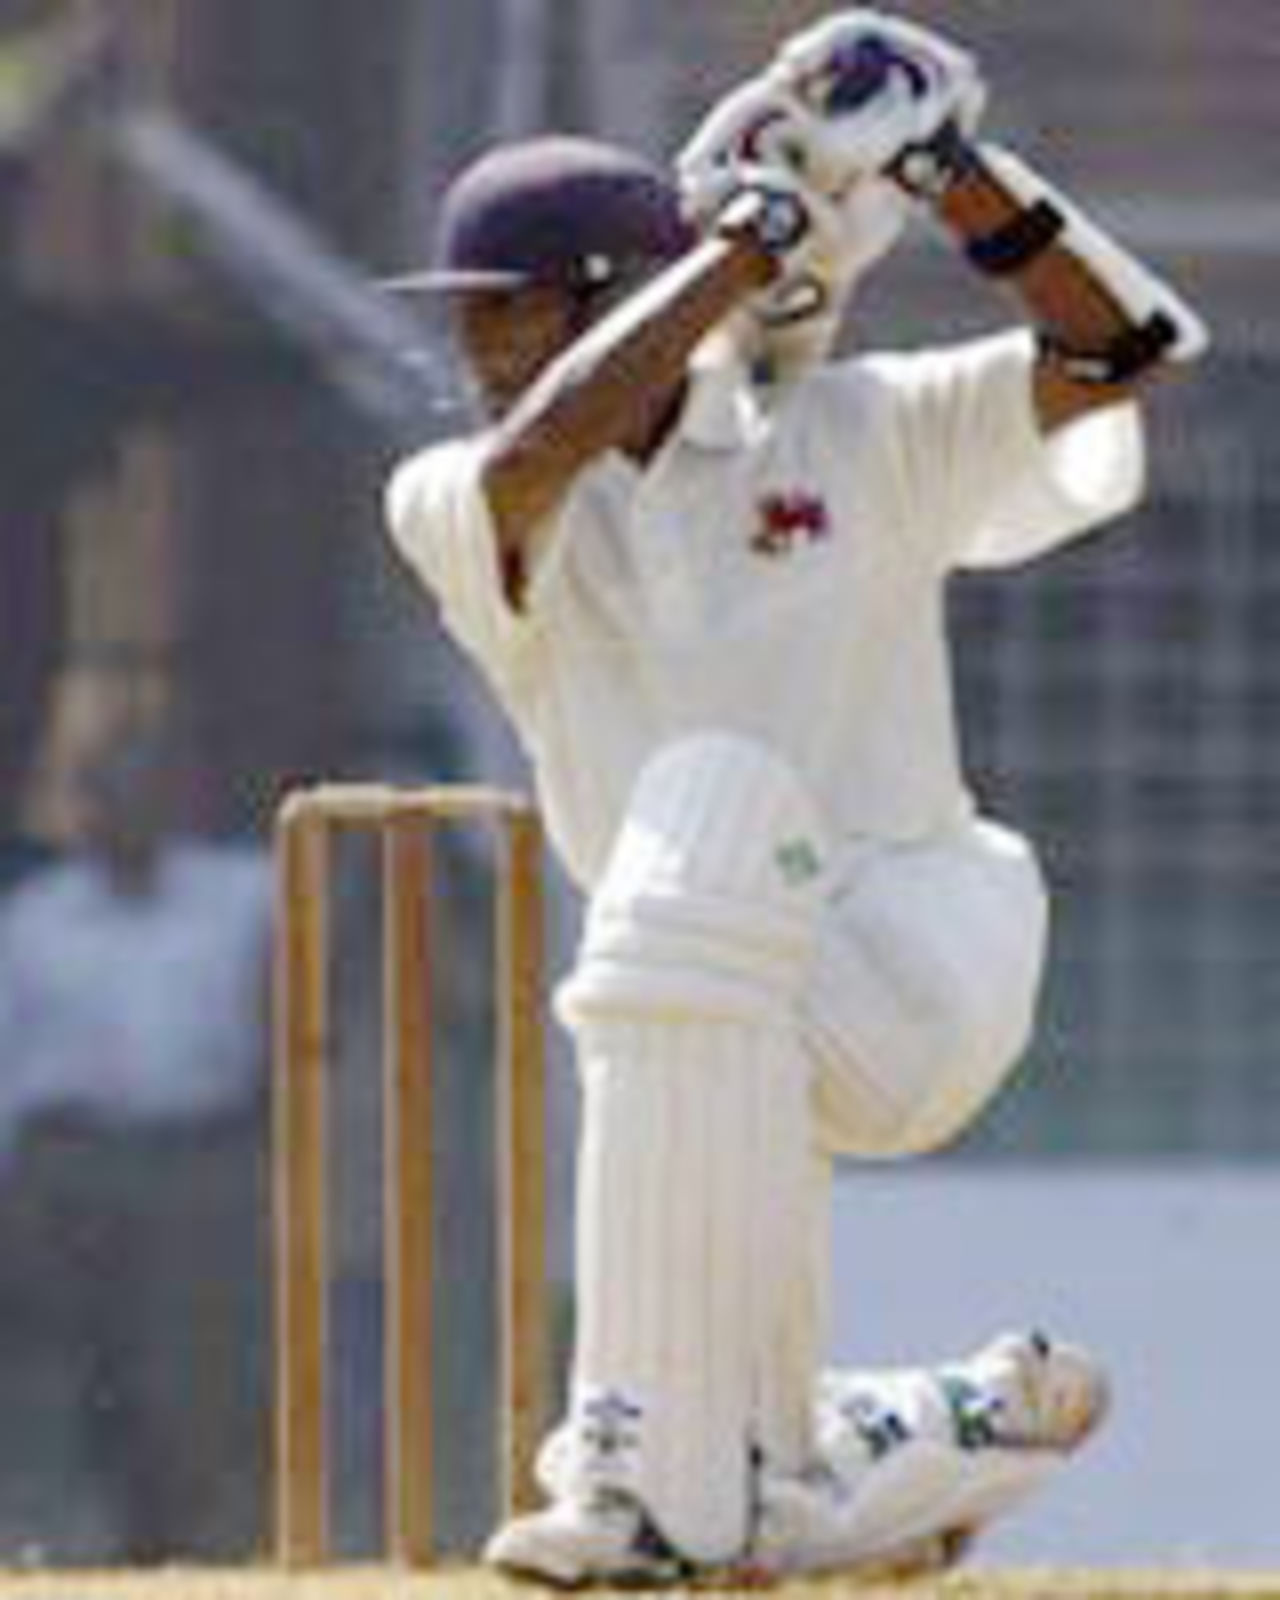 Wasim Jaffer hits out en route to 99 for the MCA Board President's XI against England at the Wankhede in 2001